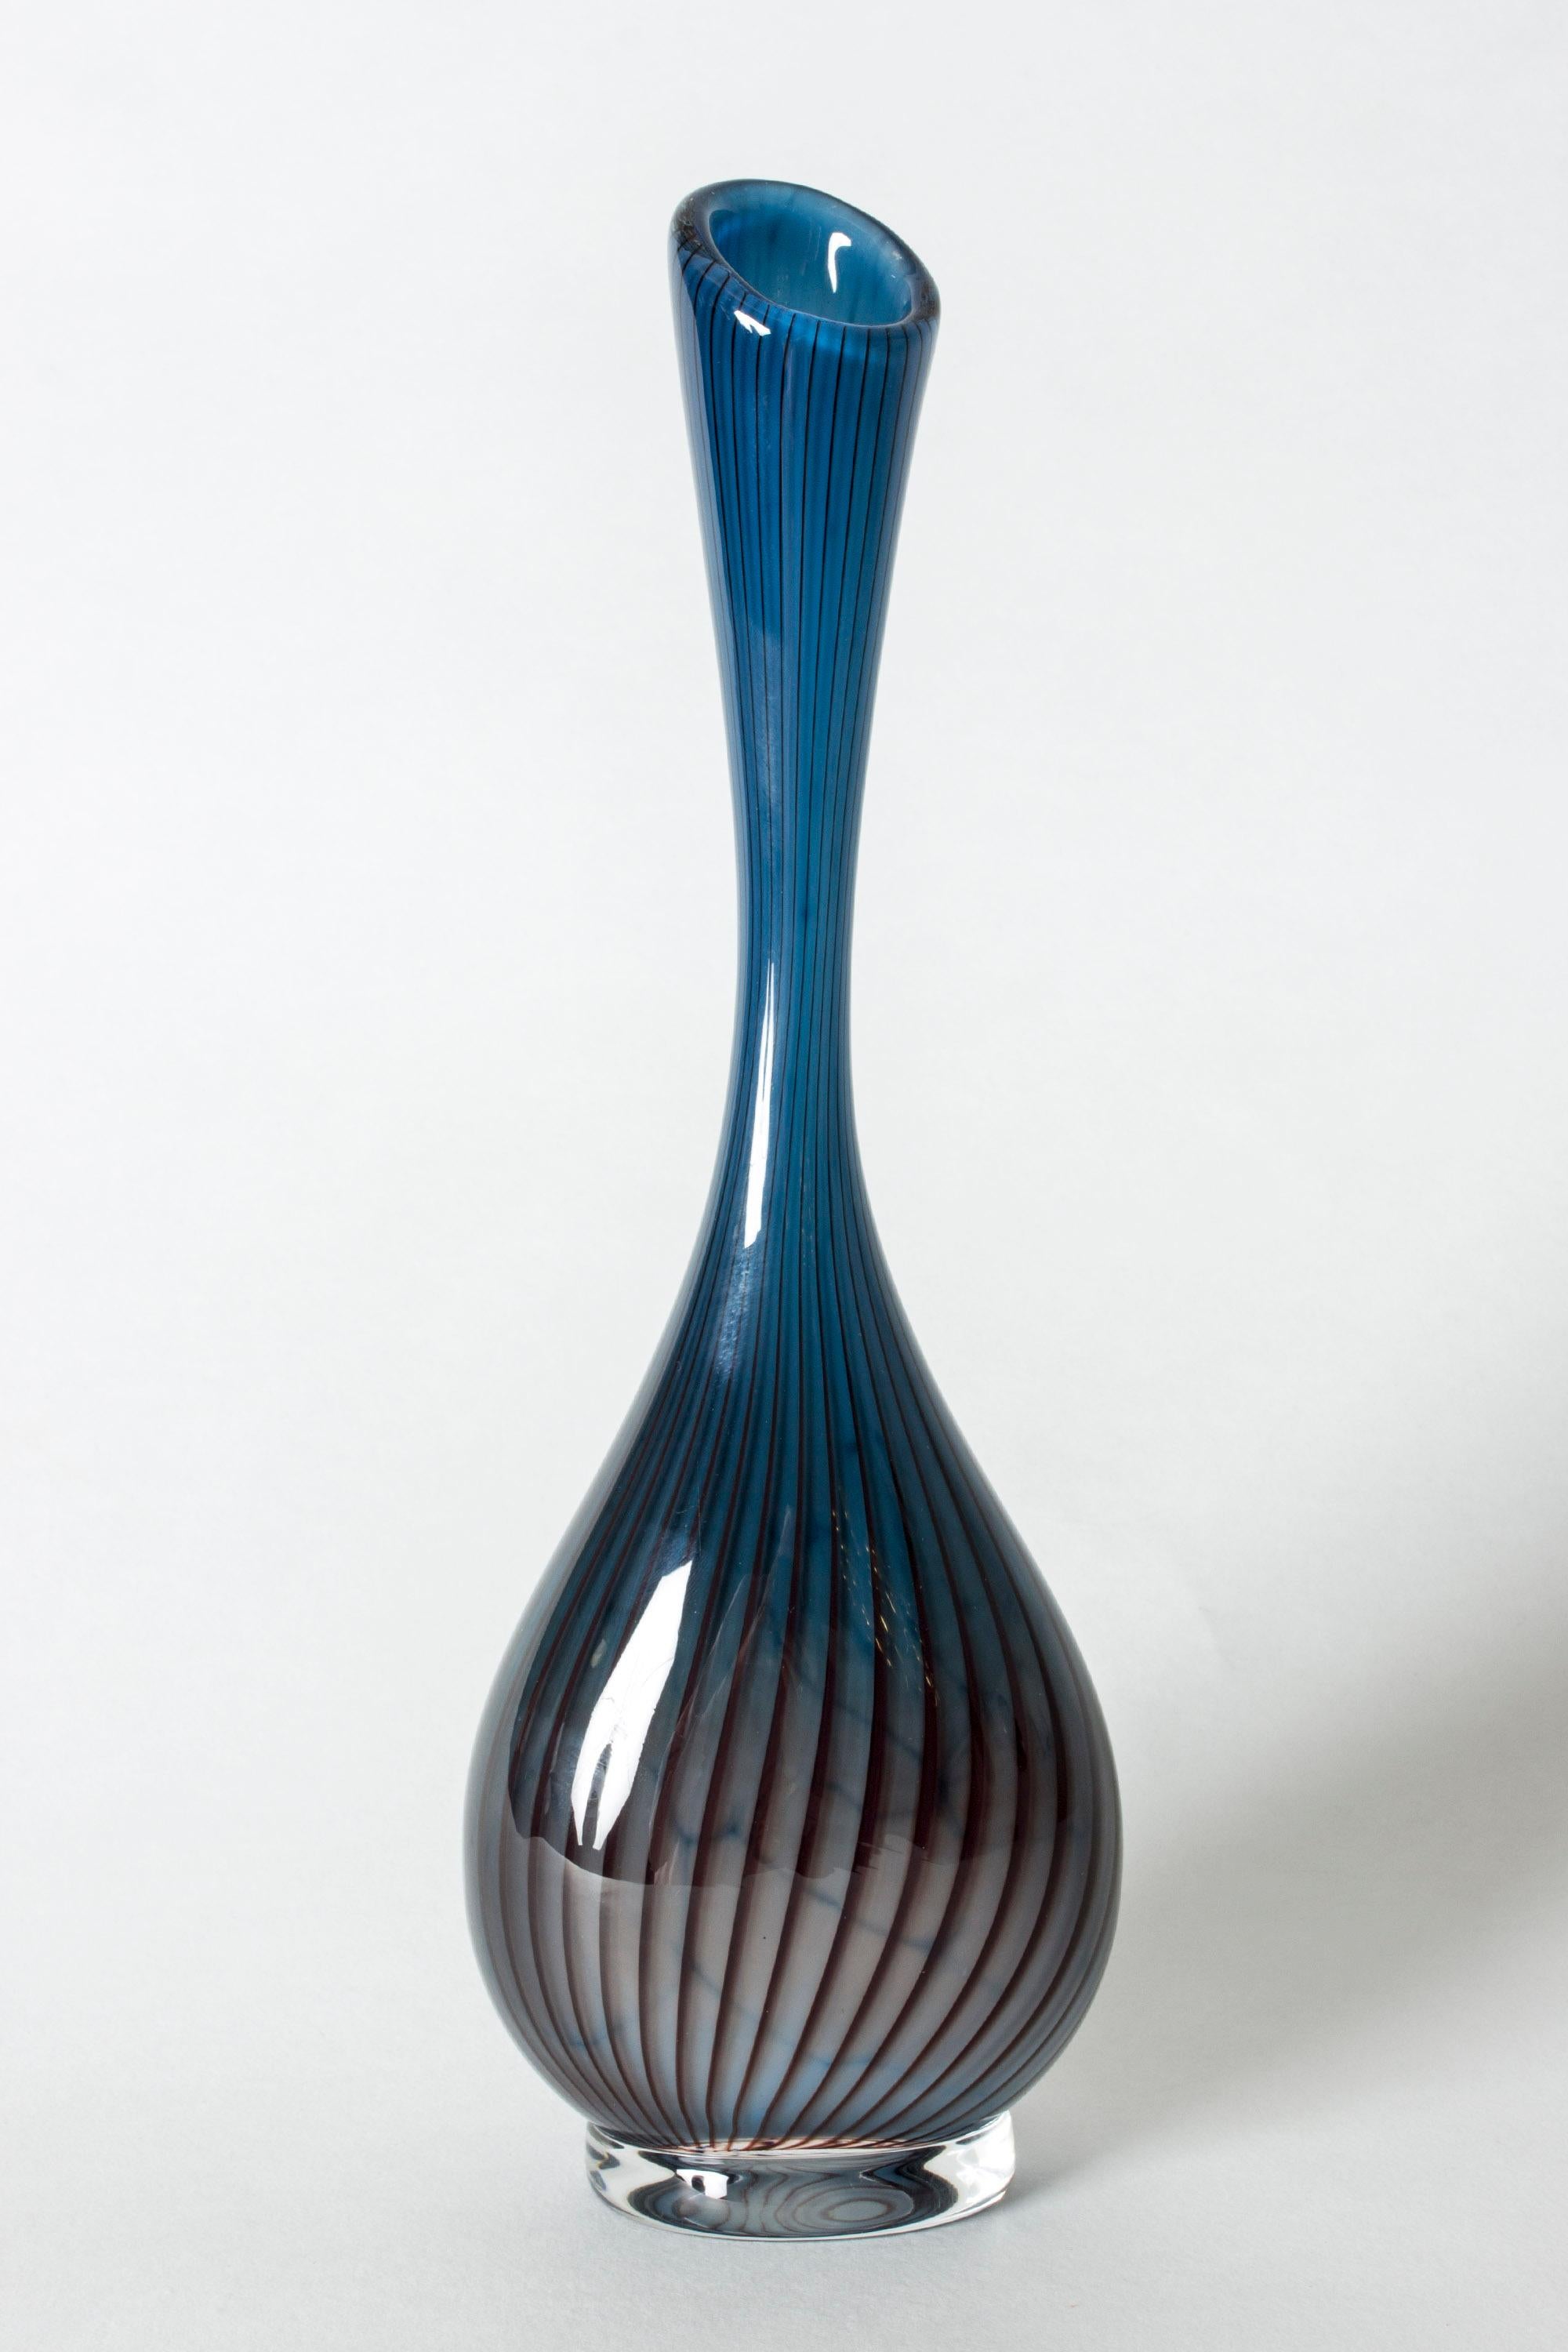 Beautiful glass vase by Vicke Lindstrand, in a smooth, organically streamlined shape. Blue glass with distinct dar stripes that give movement of the vase.